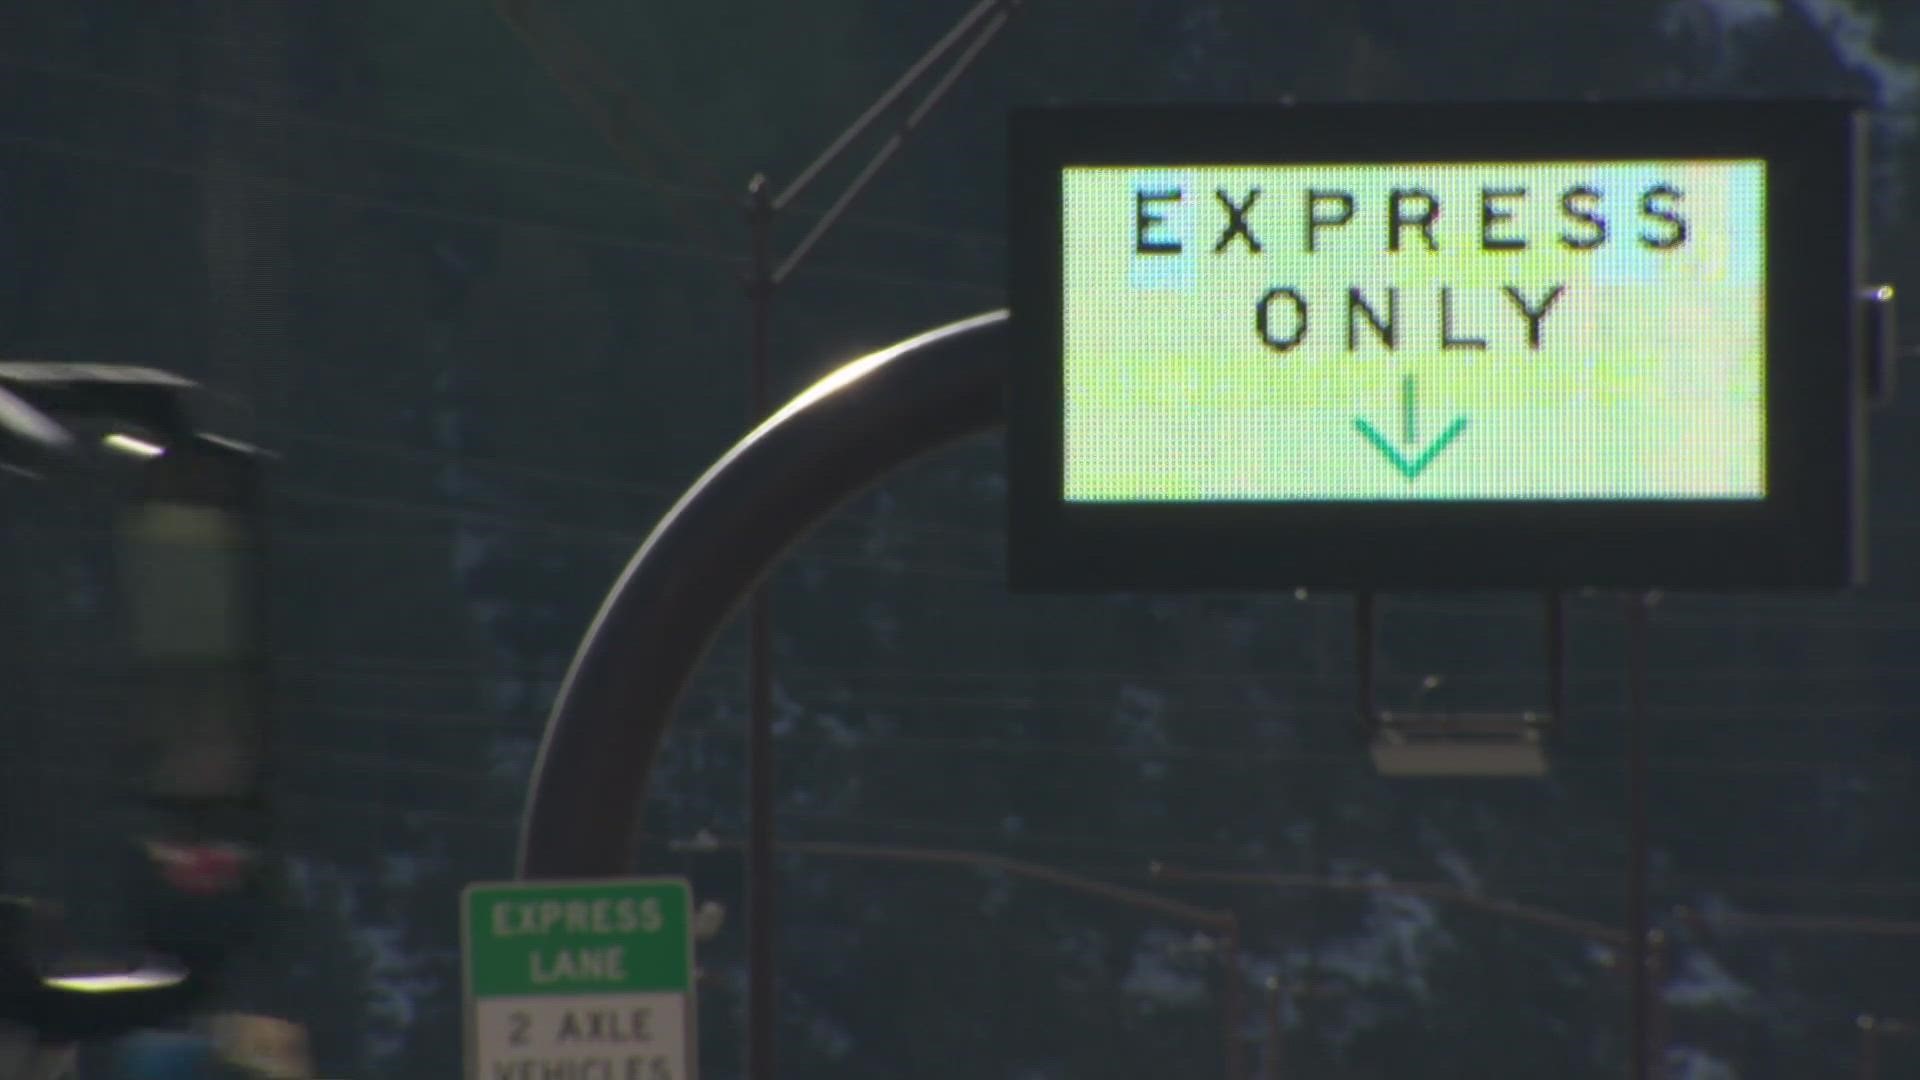 CDOT said its current system cannot issue citations, but warns driving in closed lanes is illegal, dangerous and unfair.